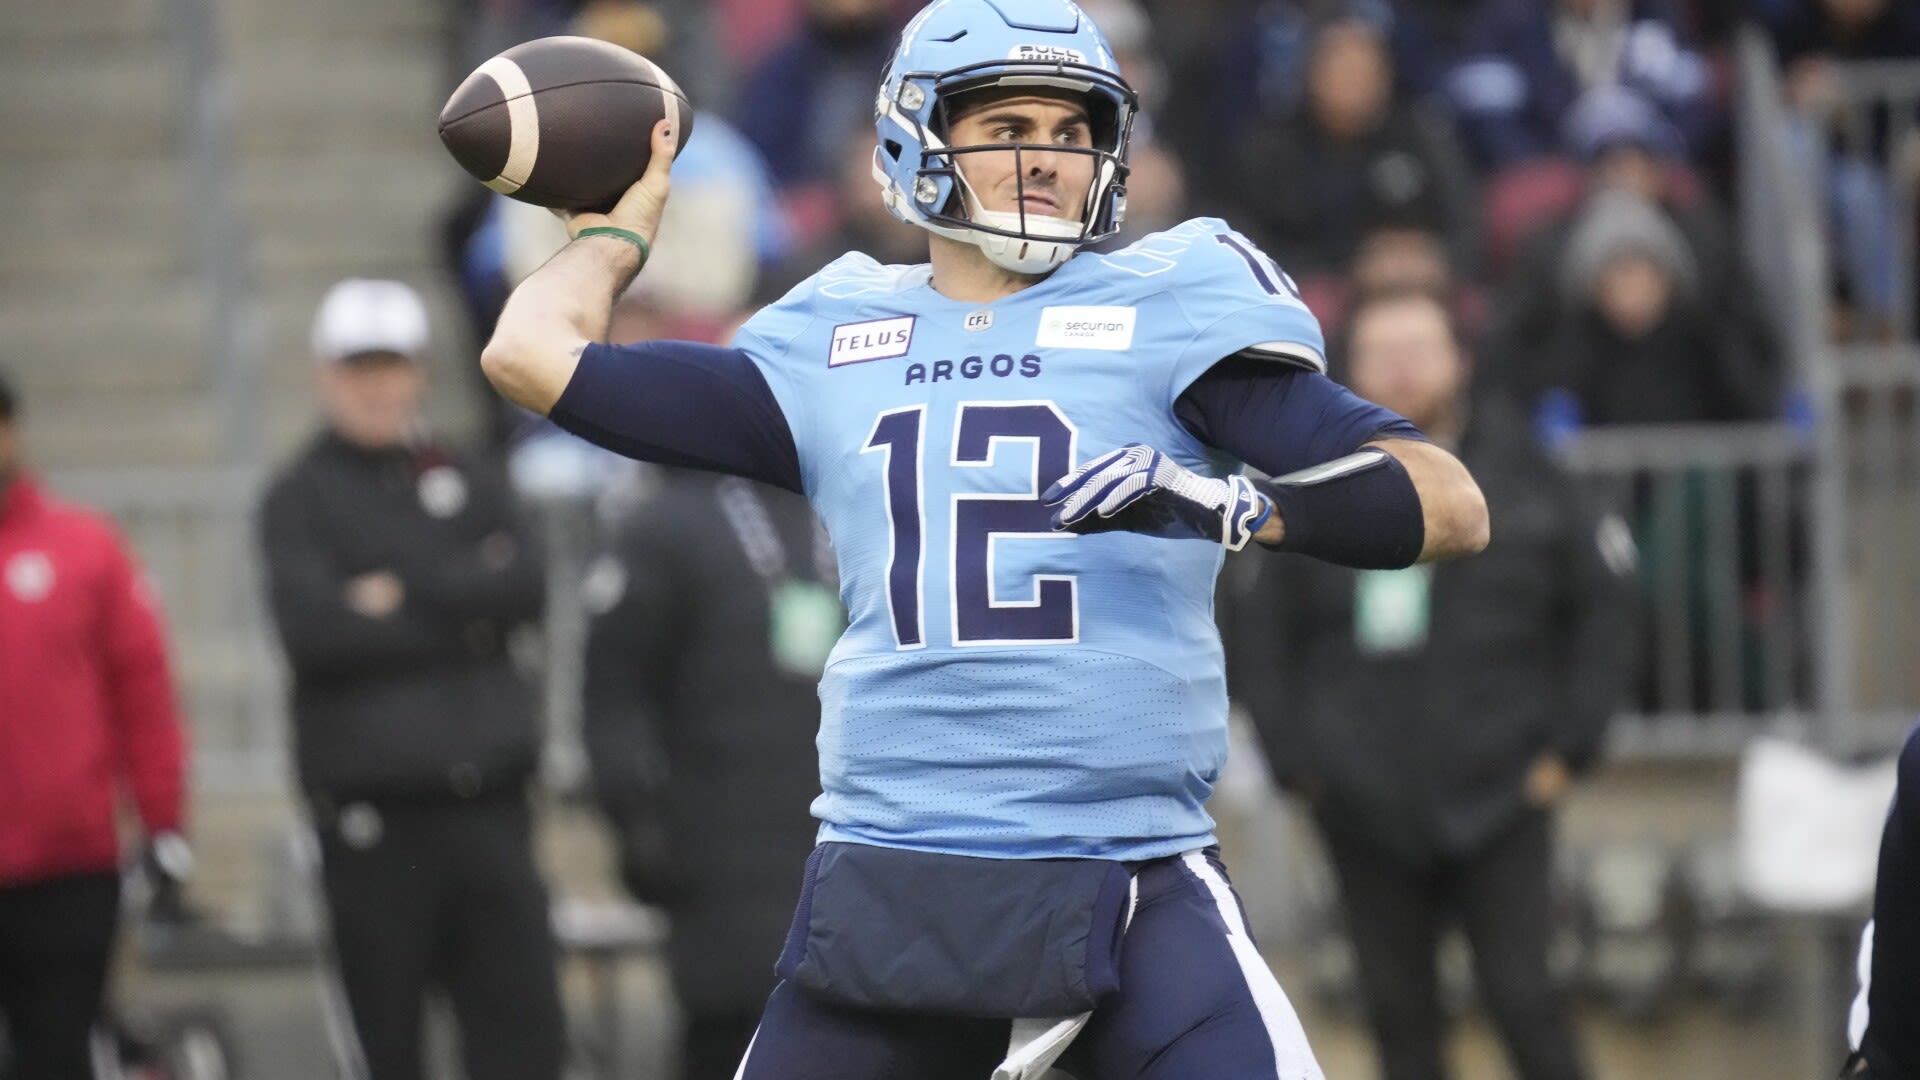 CFL suspends Chad Kelly at least 9 games for actions toward female strength coach